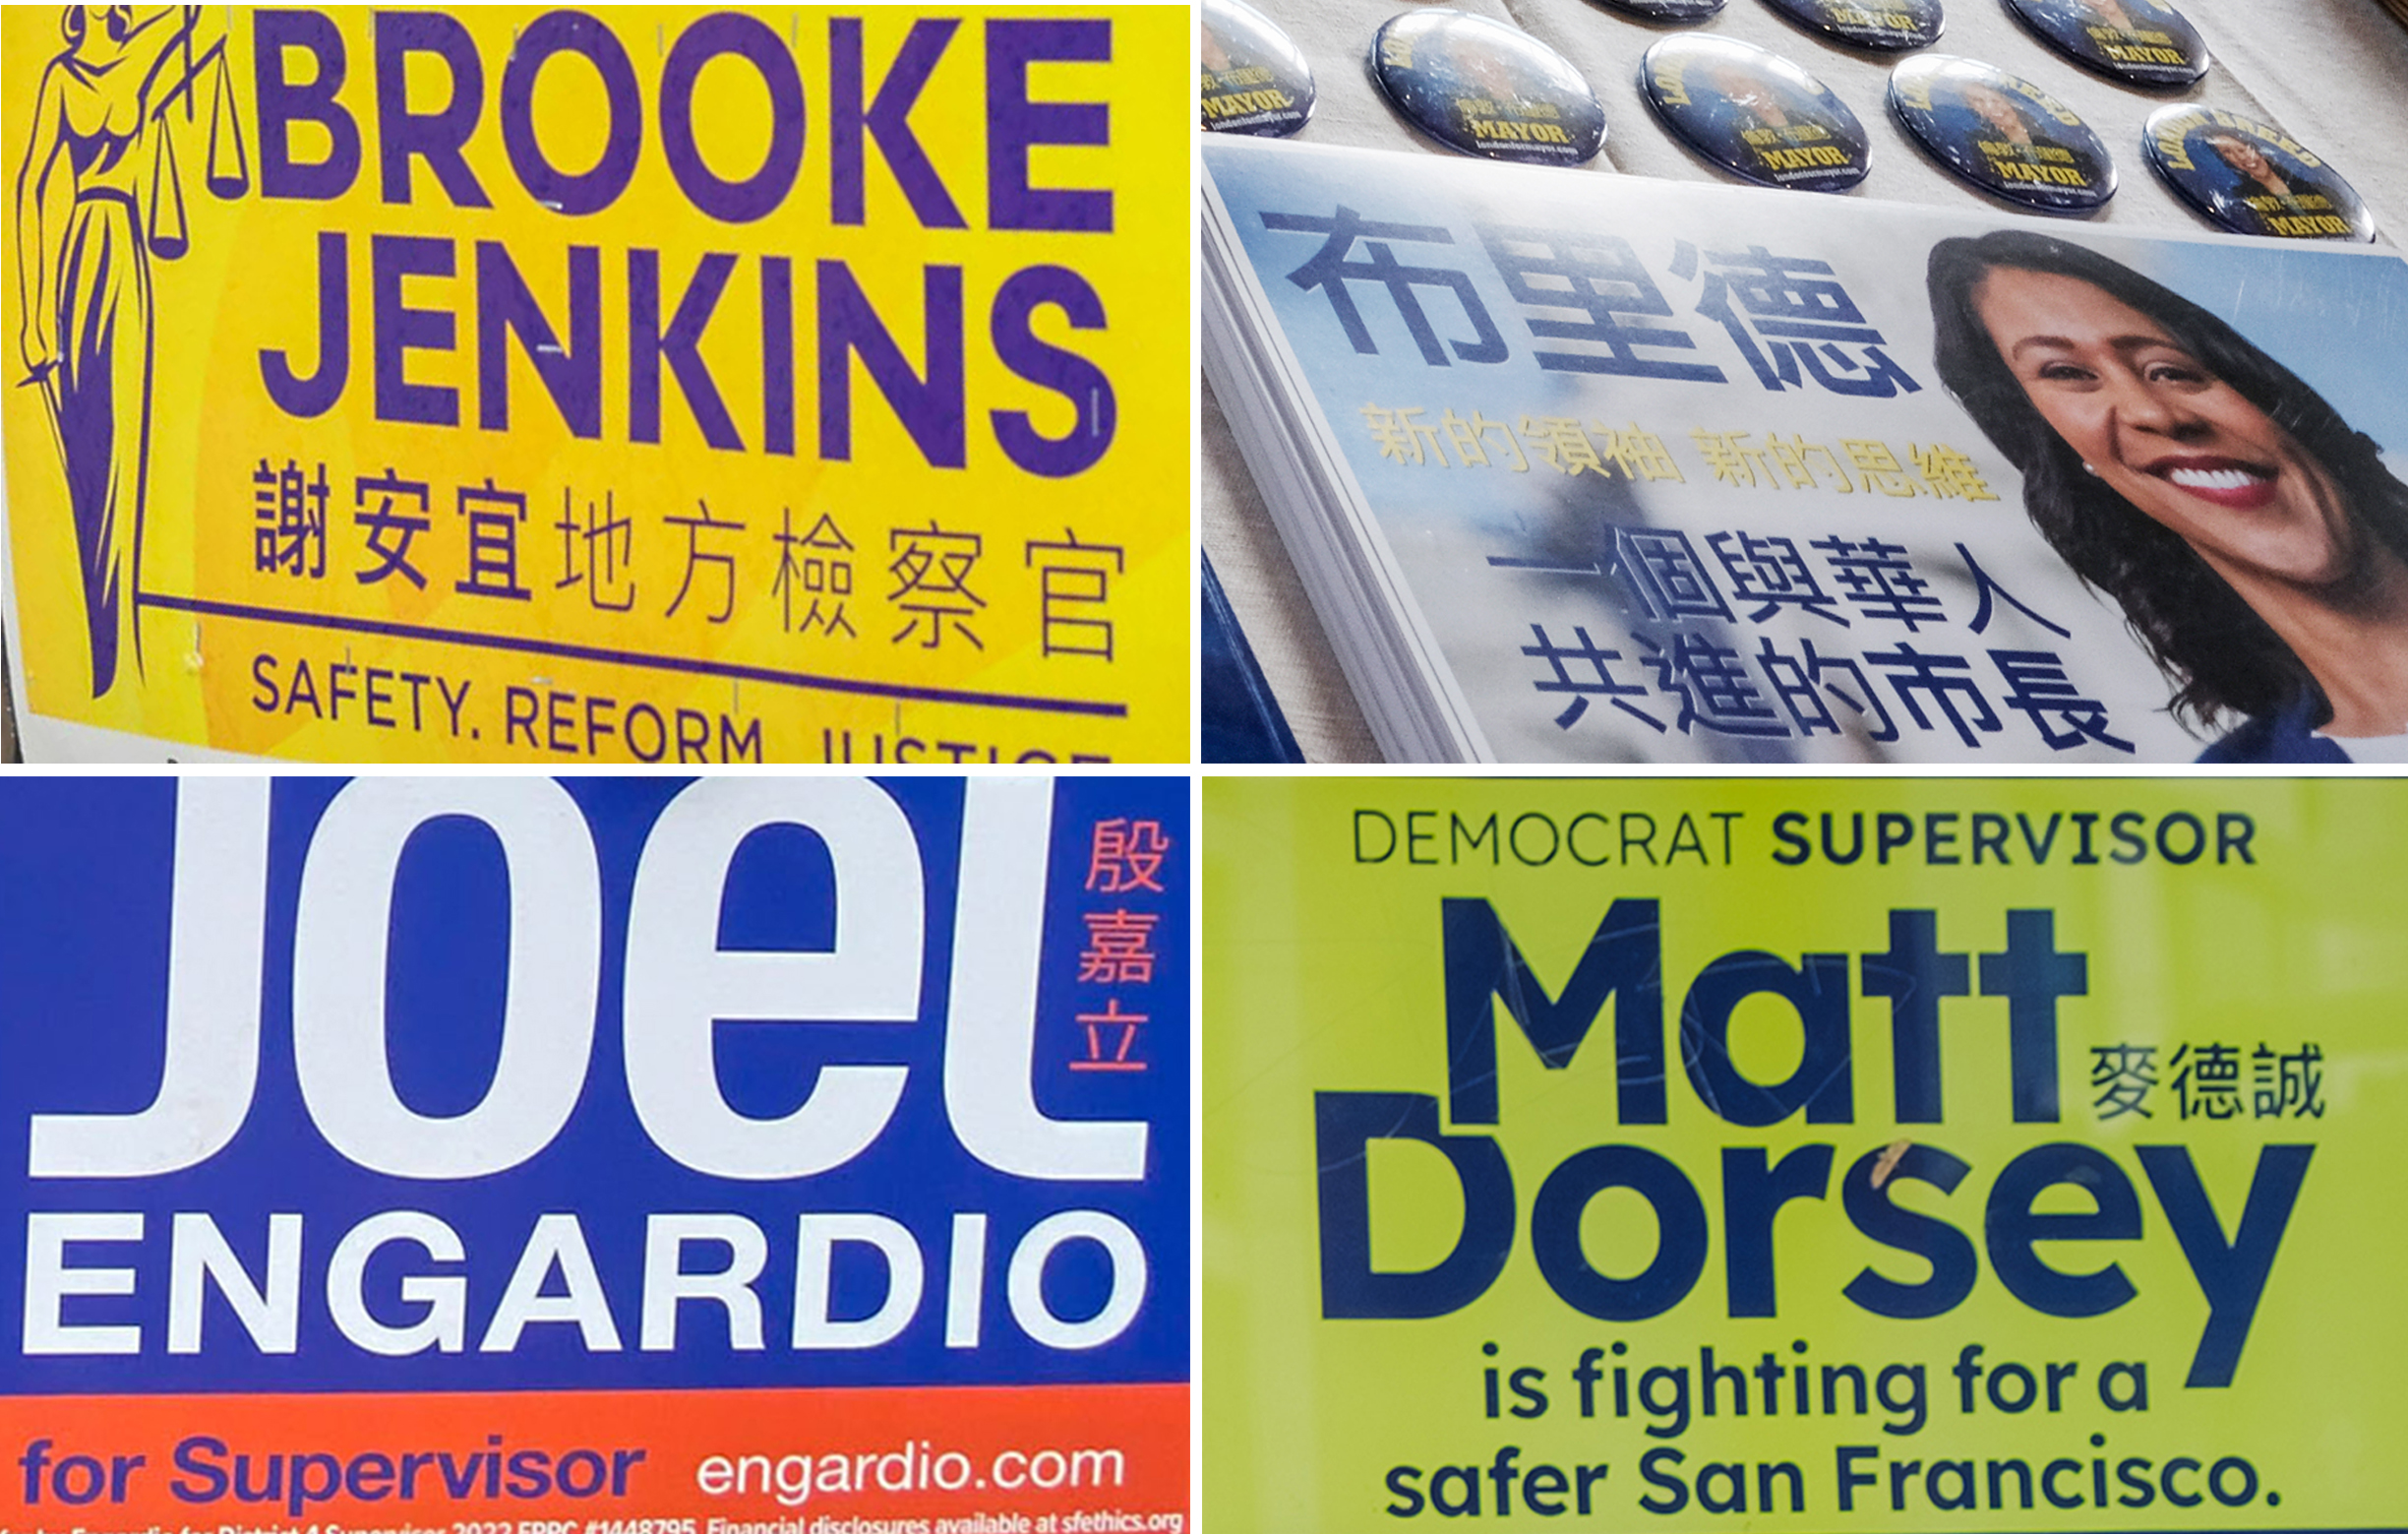 A composite image of a variety of political campaign placards that all include both English and Chinese names for City officials (from top left clockwise) District Attorney Brooke Jenkins, Mayor London Breed, Supervisor Matt Dorsey and Supervisor Joel Engardio.